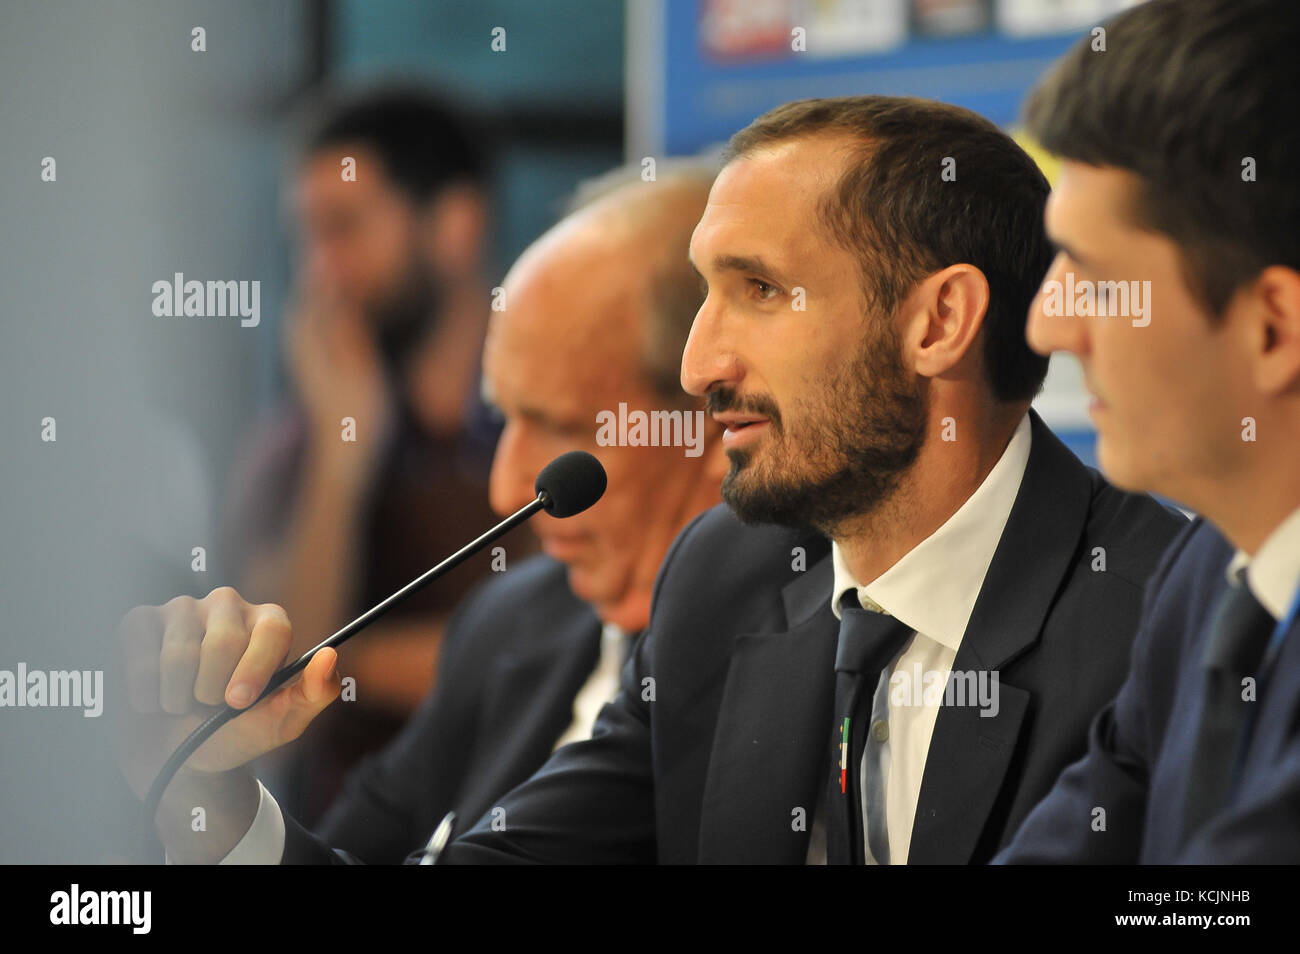 Turin, Italy. 5th Oct, 2017. Giorgio Chiellini (football player ITALIA) during the media conference before FIFA World Cup qualifiers Russia 2018 football match between ITALIA and MACEDONIA at Stadium Olimpico Grande Torino on 5 October, 2017 in Turin, Italy. Credit: FABIO PETROSINO/Alamy Live News Stock Photo